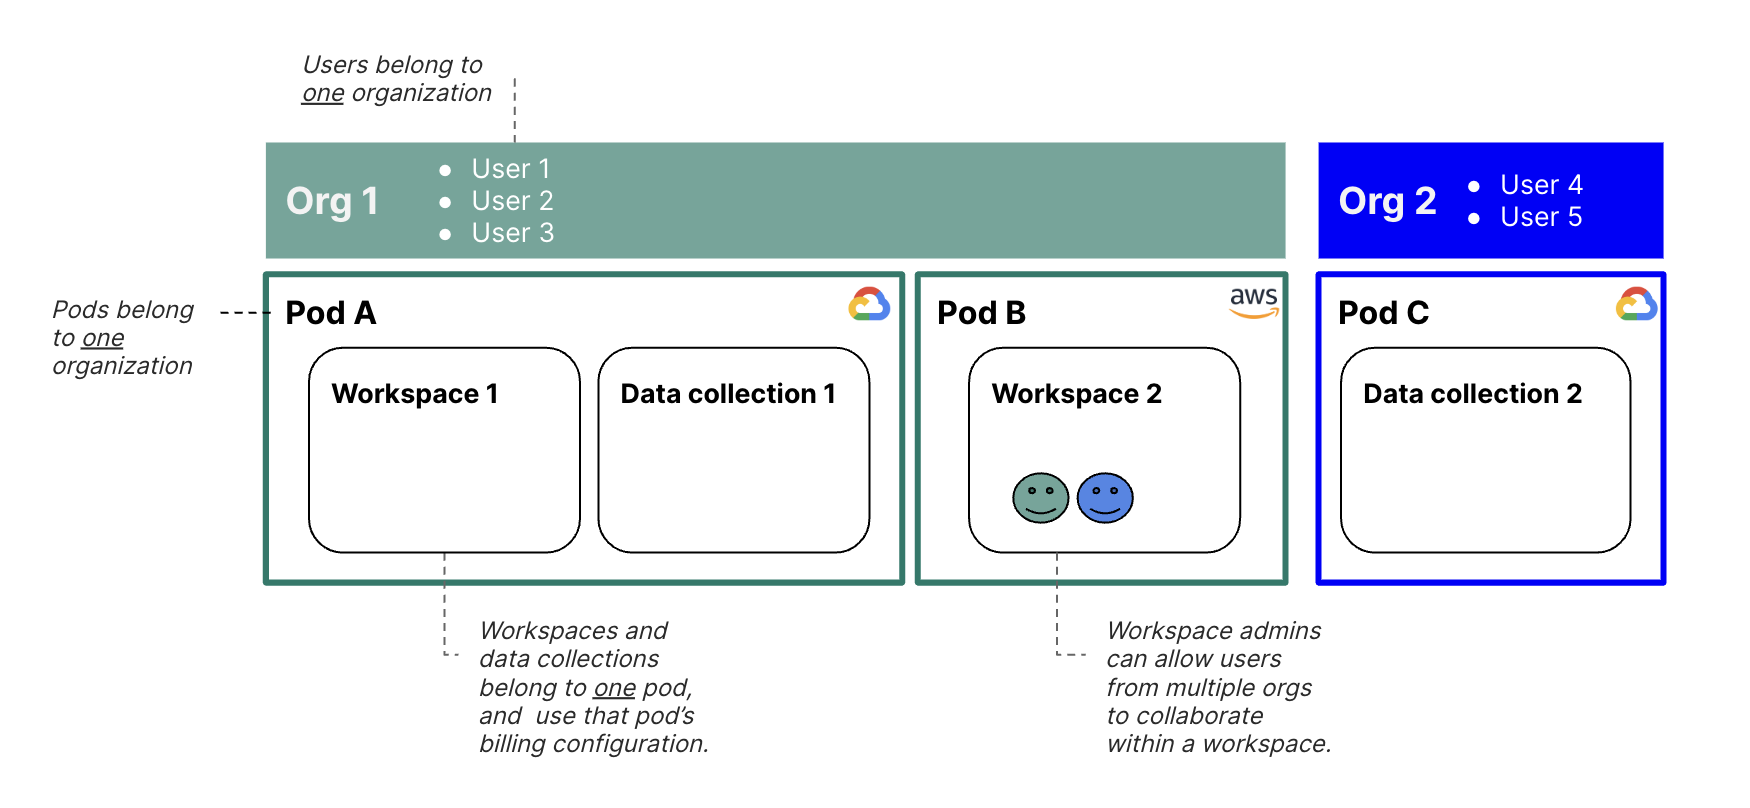 Diagram showing how organizations, pods, users, and workspaces and data collections relate to one another.